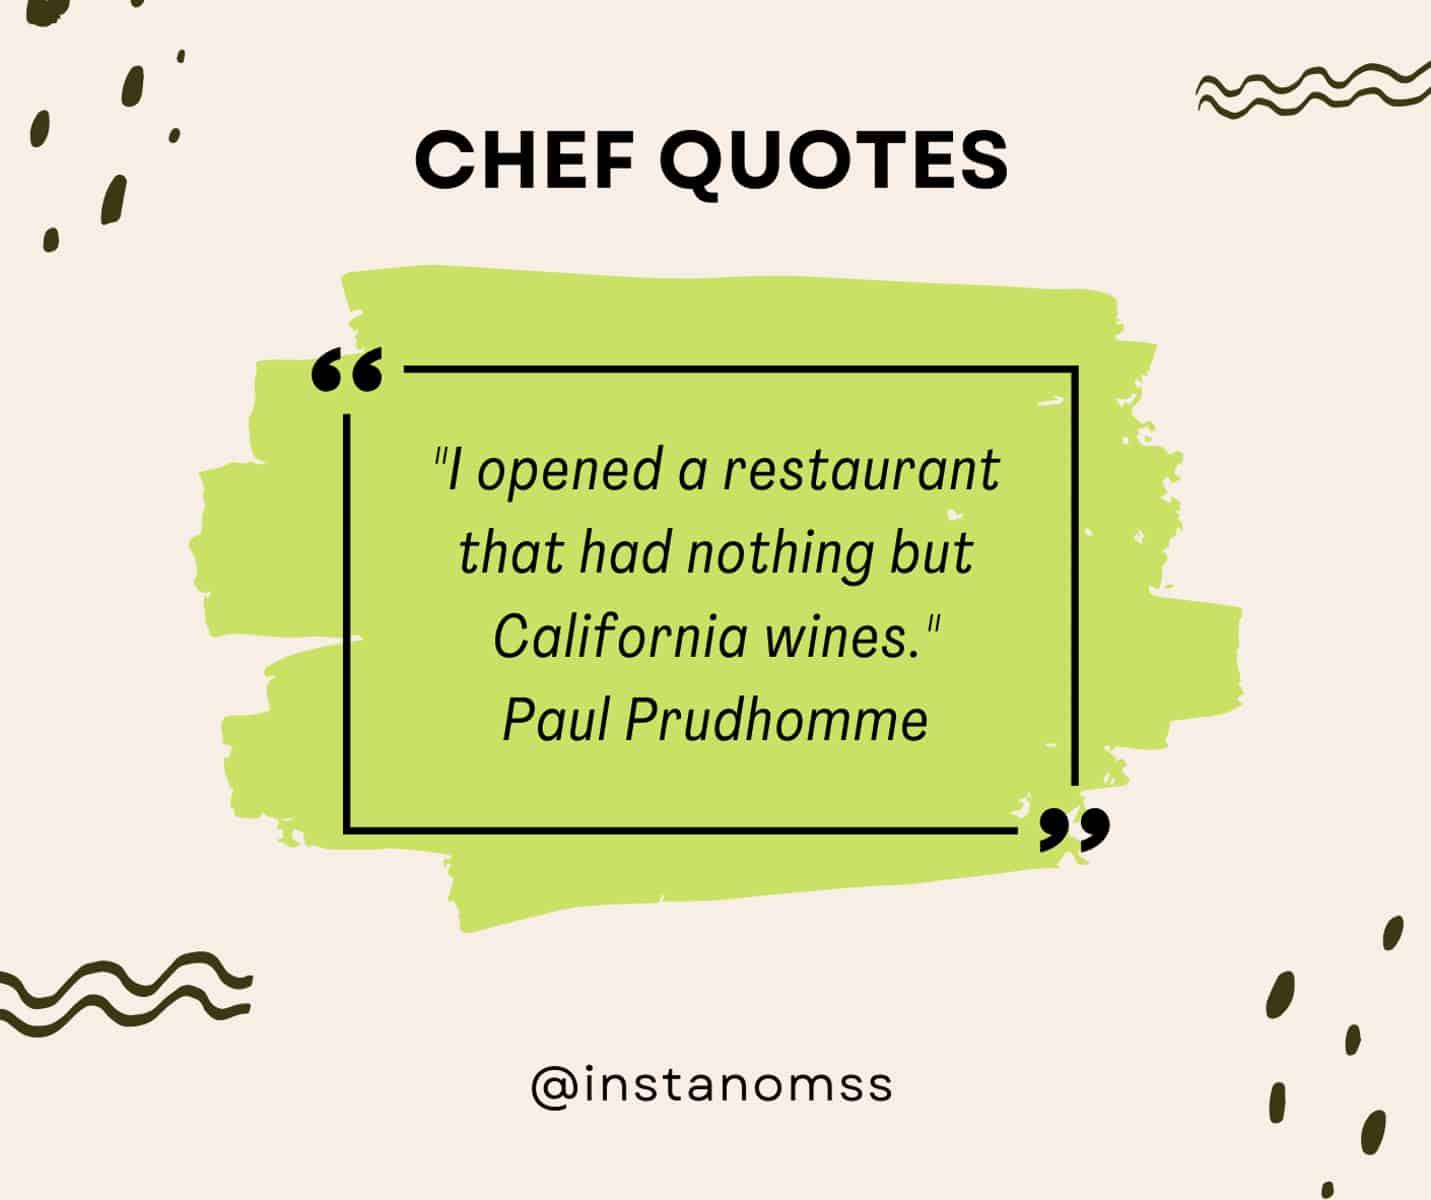 "I opened a restaurant that had nothing but California wines." Paul Prudhomme